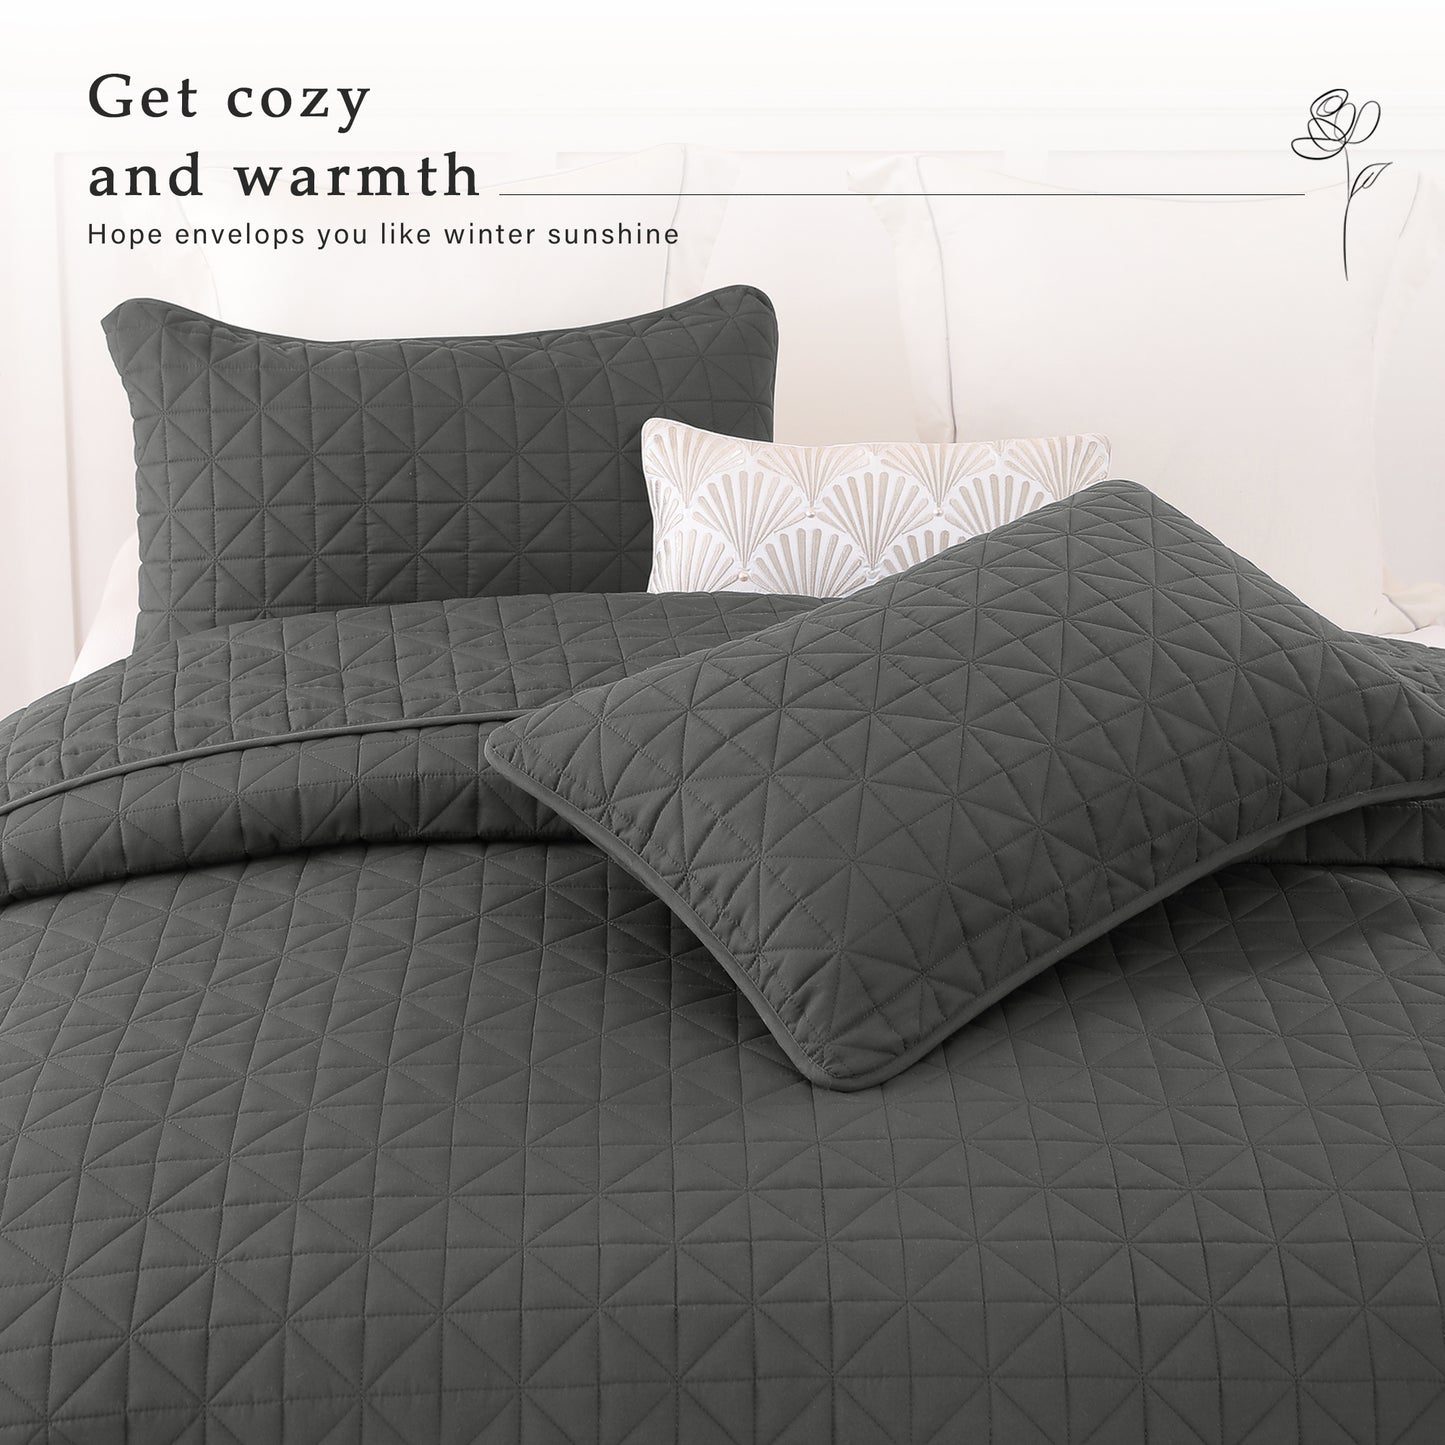 Exclusivo Mezcla Twin Quilt Bedding Set for All Seasons, Lightweight Soft Grey Quilts Twin Size Bedspreads Coverlets Bed Cover with Geometric Stitched Pattern, (1 Quilt, 1 Pillow Sham)